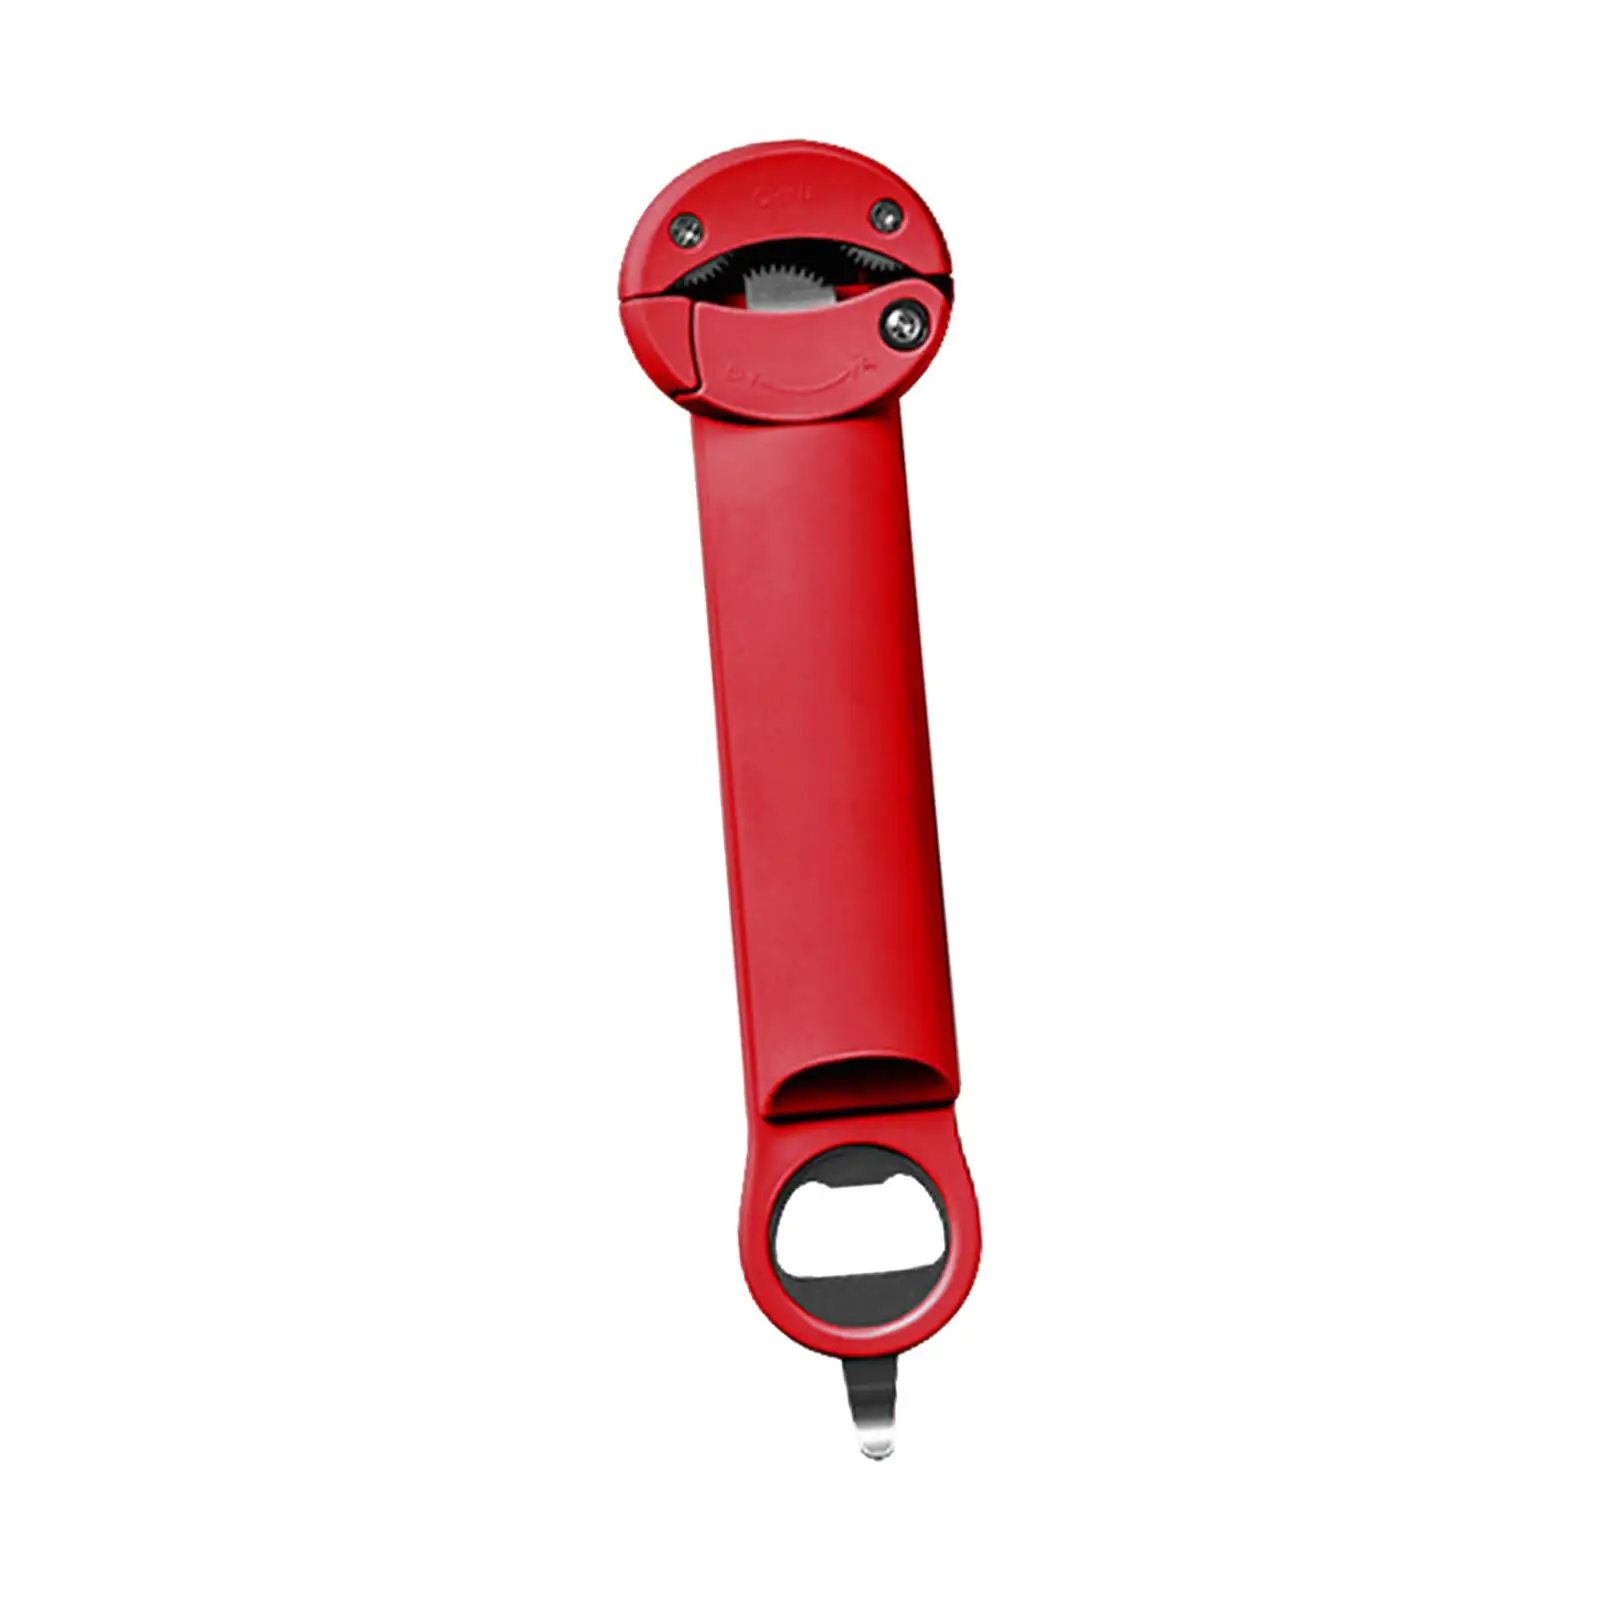 Manual Can Opener Save Labors Anti Slip Fits Most Sizes for Weak Hands Effortless Cans Tops Remover Jars Openers Kitchen Camping